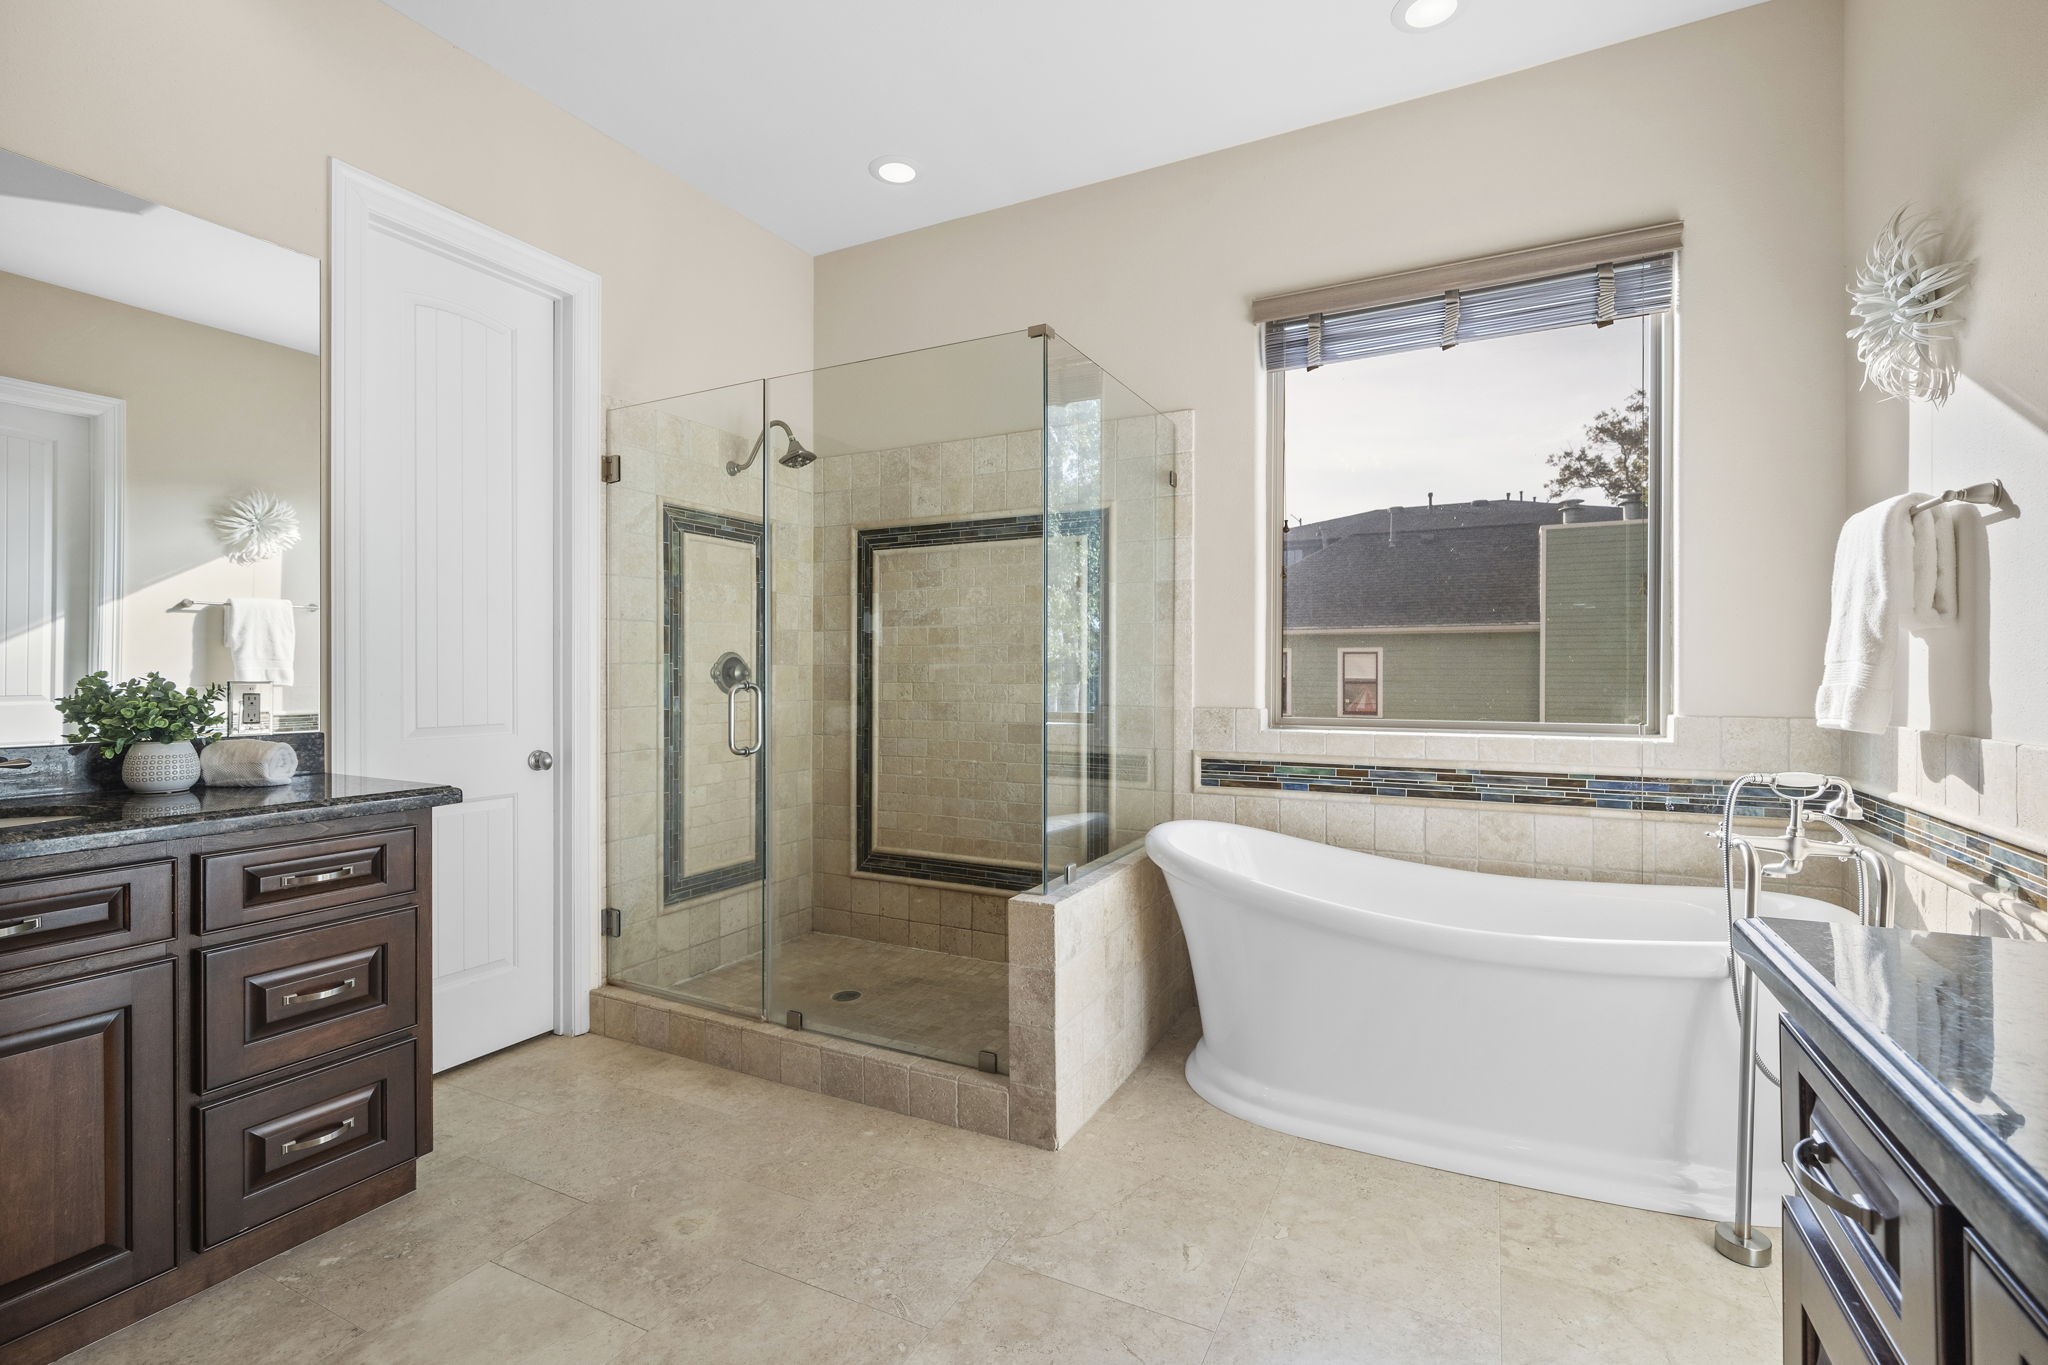 The luxurious primary ensuite bath showcases tile flooring, a water closet for privacy, abundant natural light cascading through the large window, and separate vanities fitted with granite countertops and built-in cabinets.